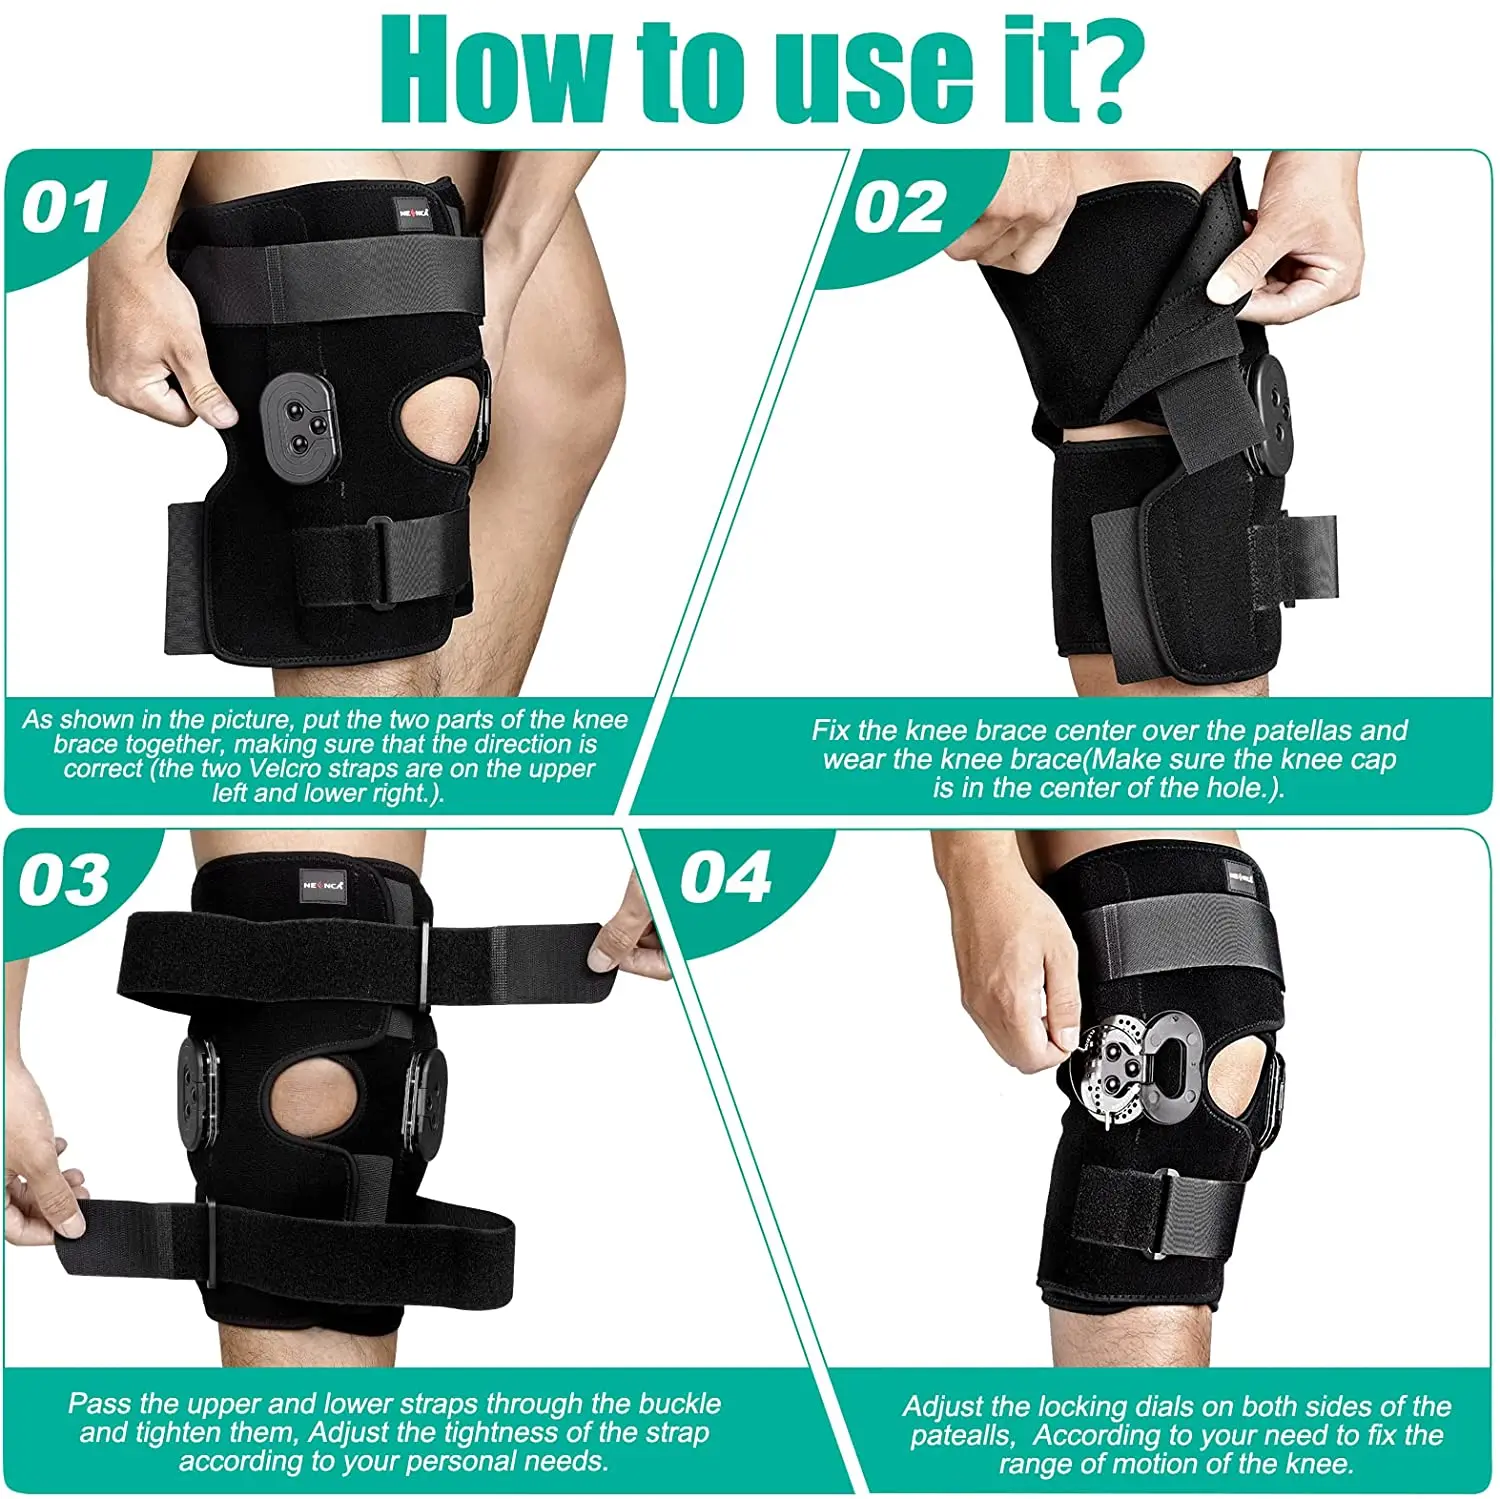 ACE Brand Knee Brace W/ Side Stabilizers, Easy-to-Use, Breathable 